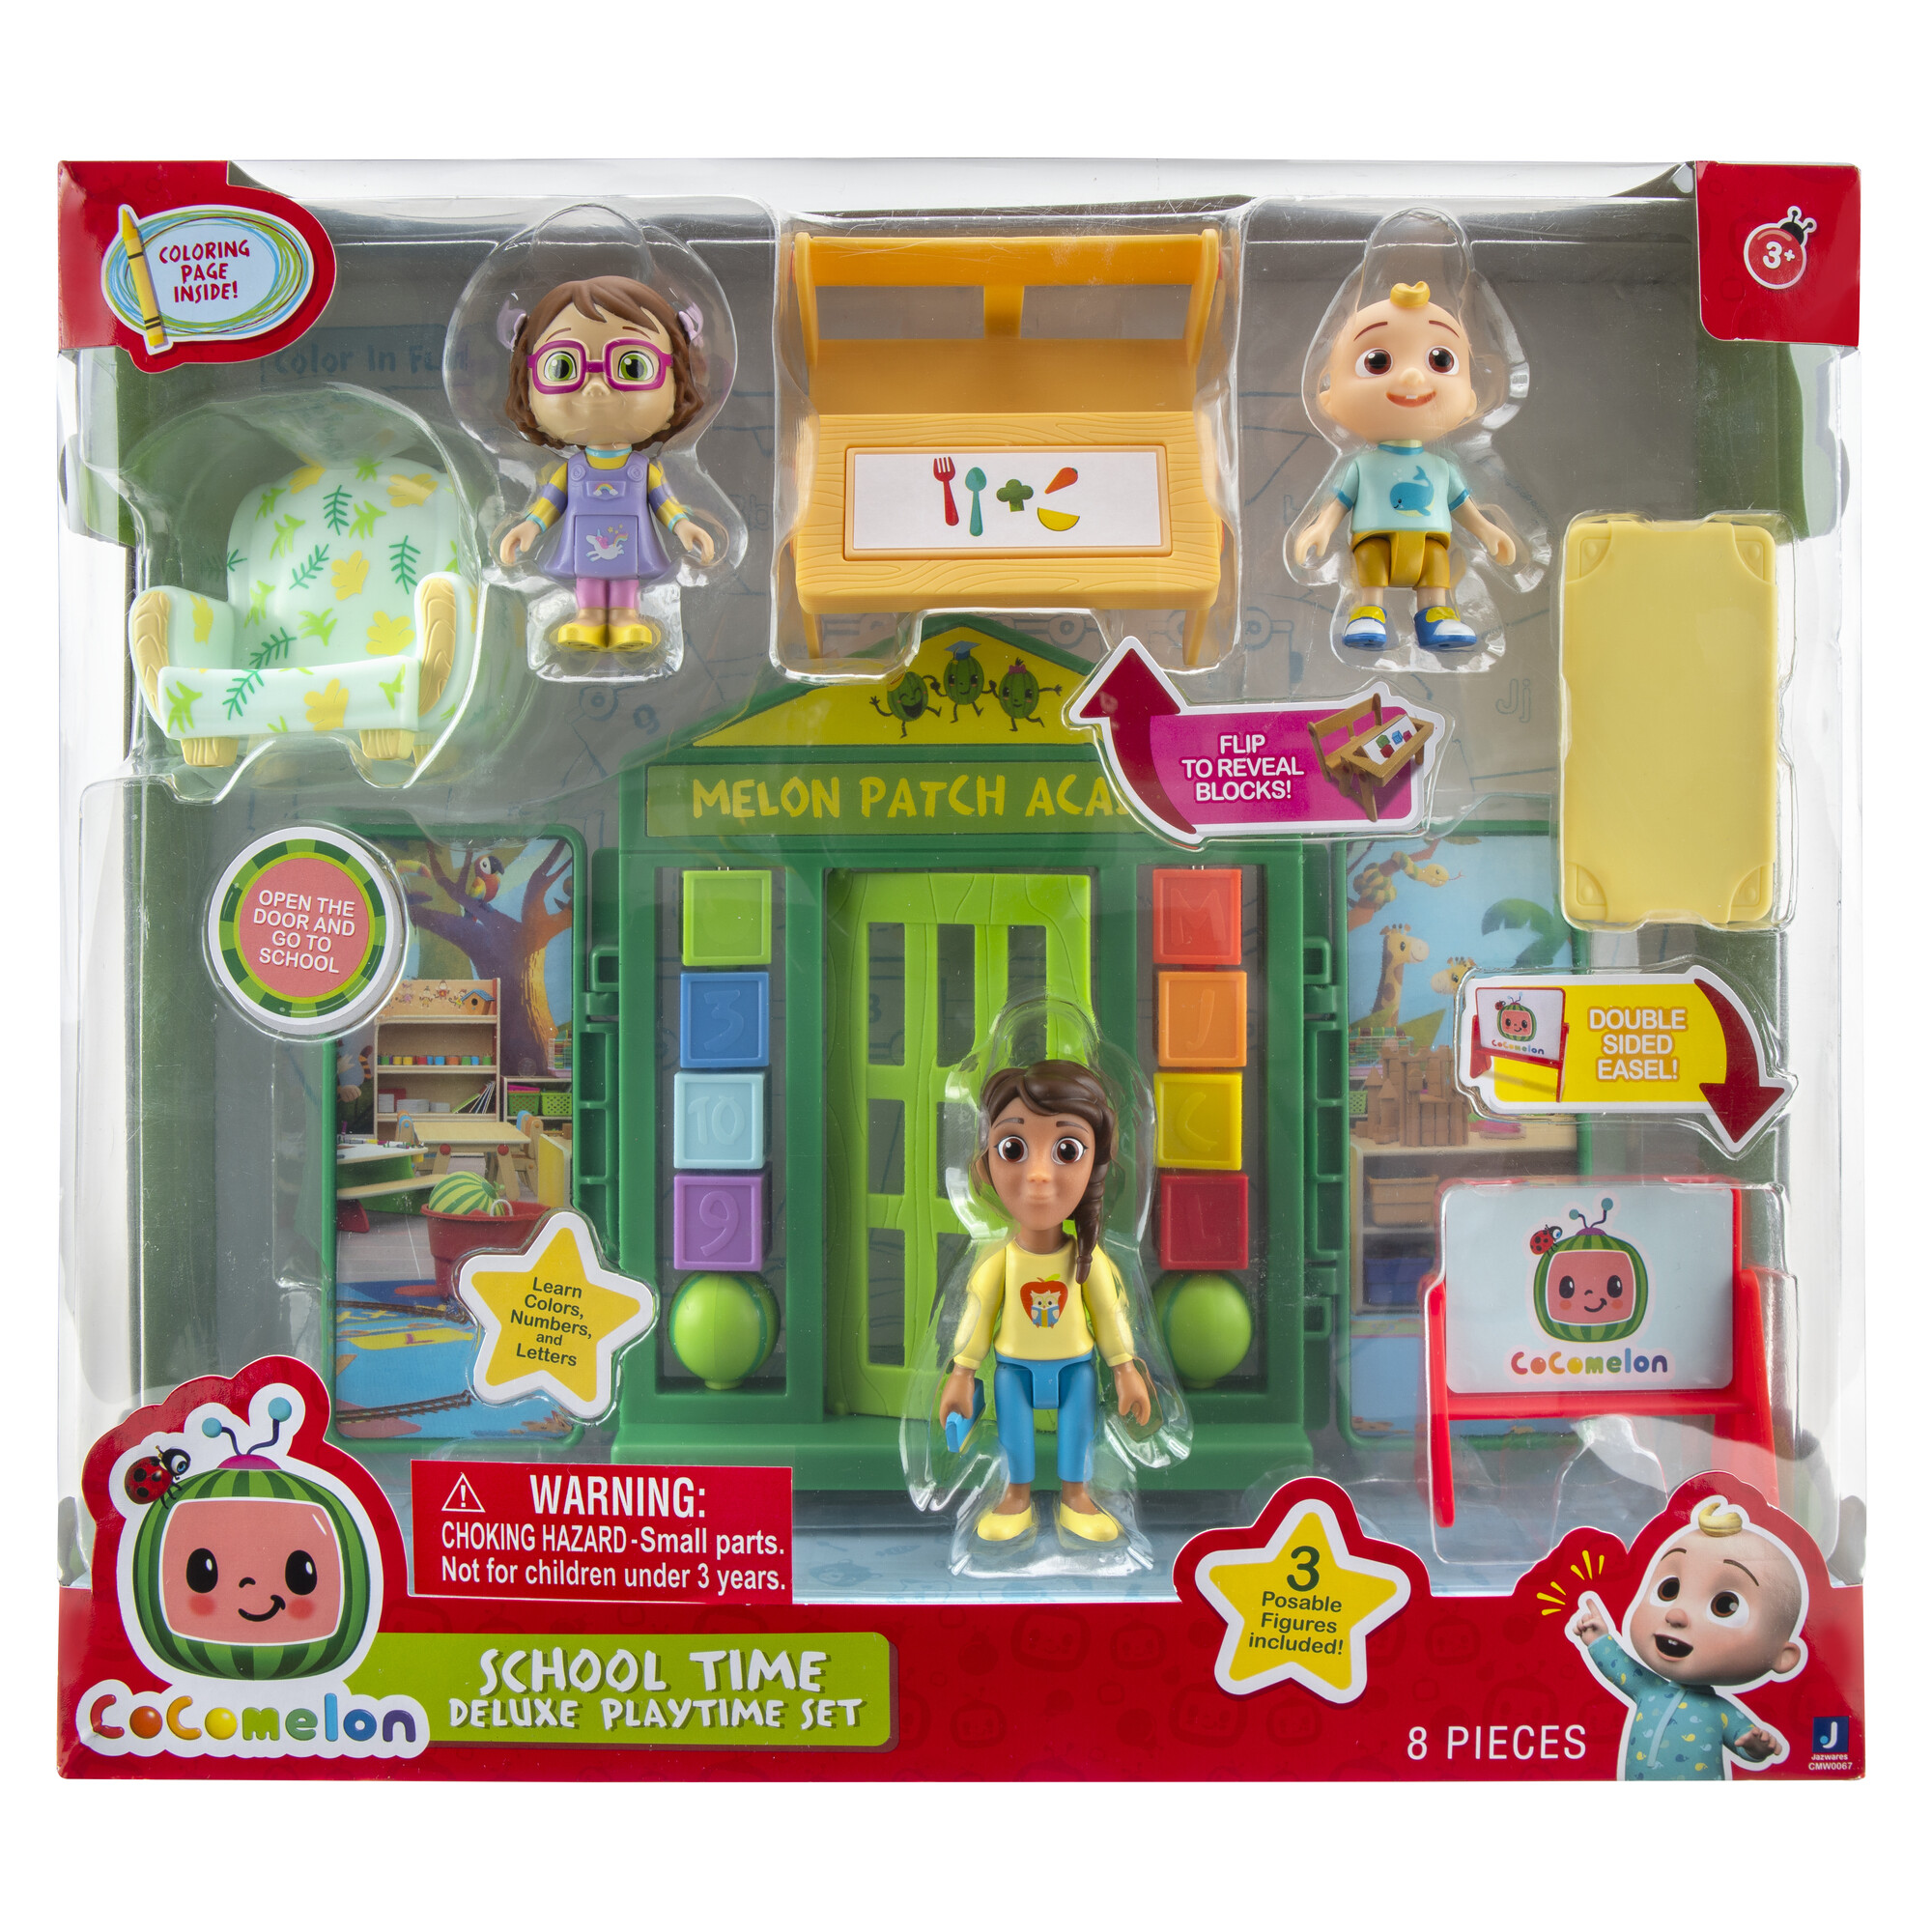 COCOMELON Schooltime Deluxe Playtime Playset - image 2 of 11